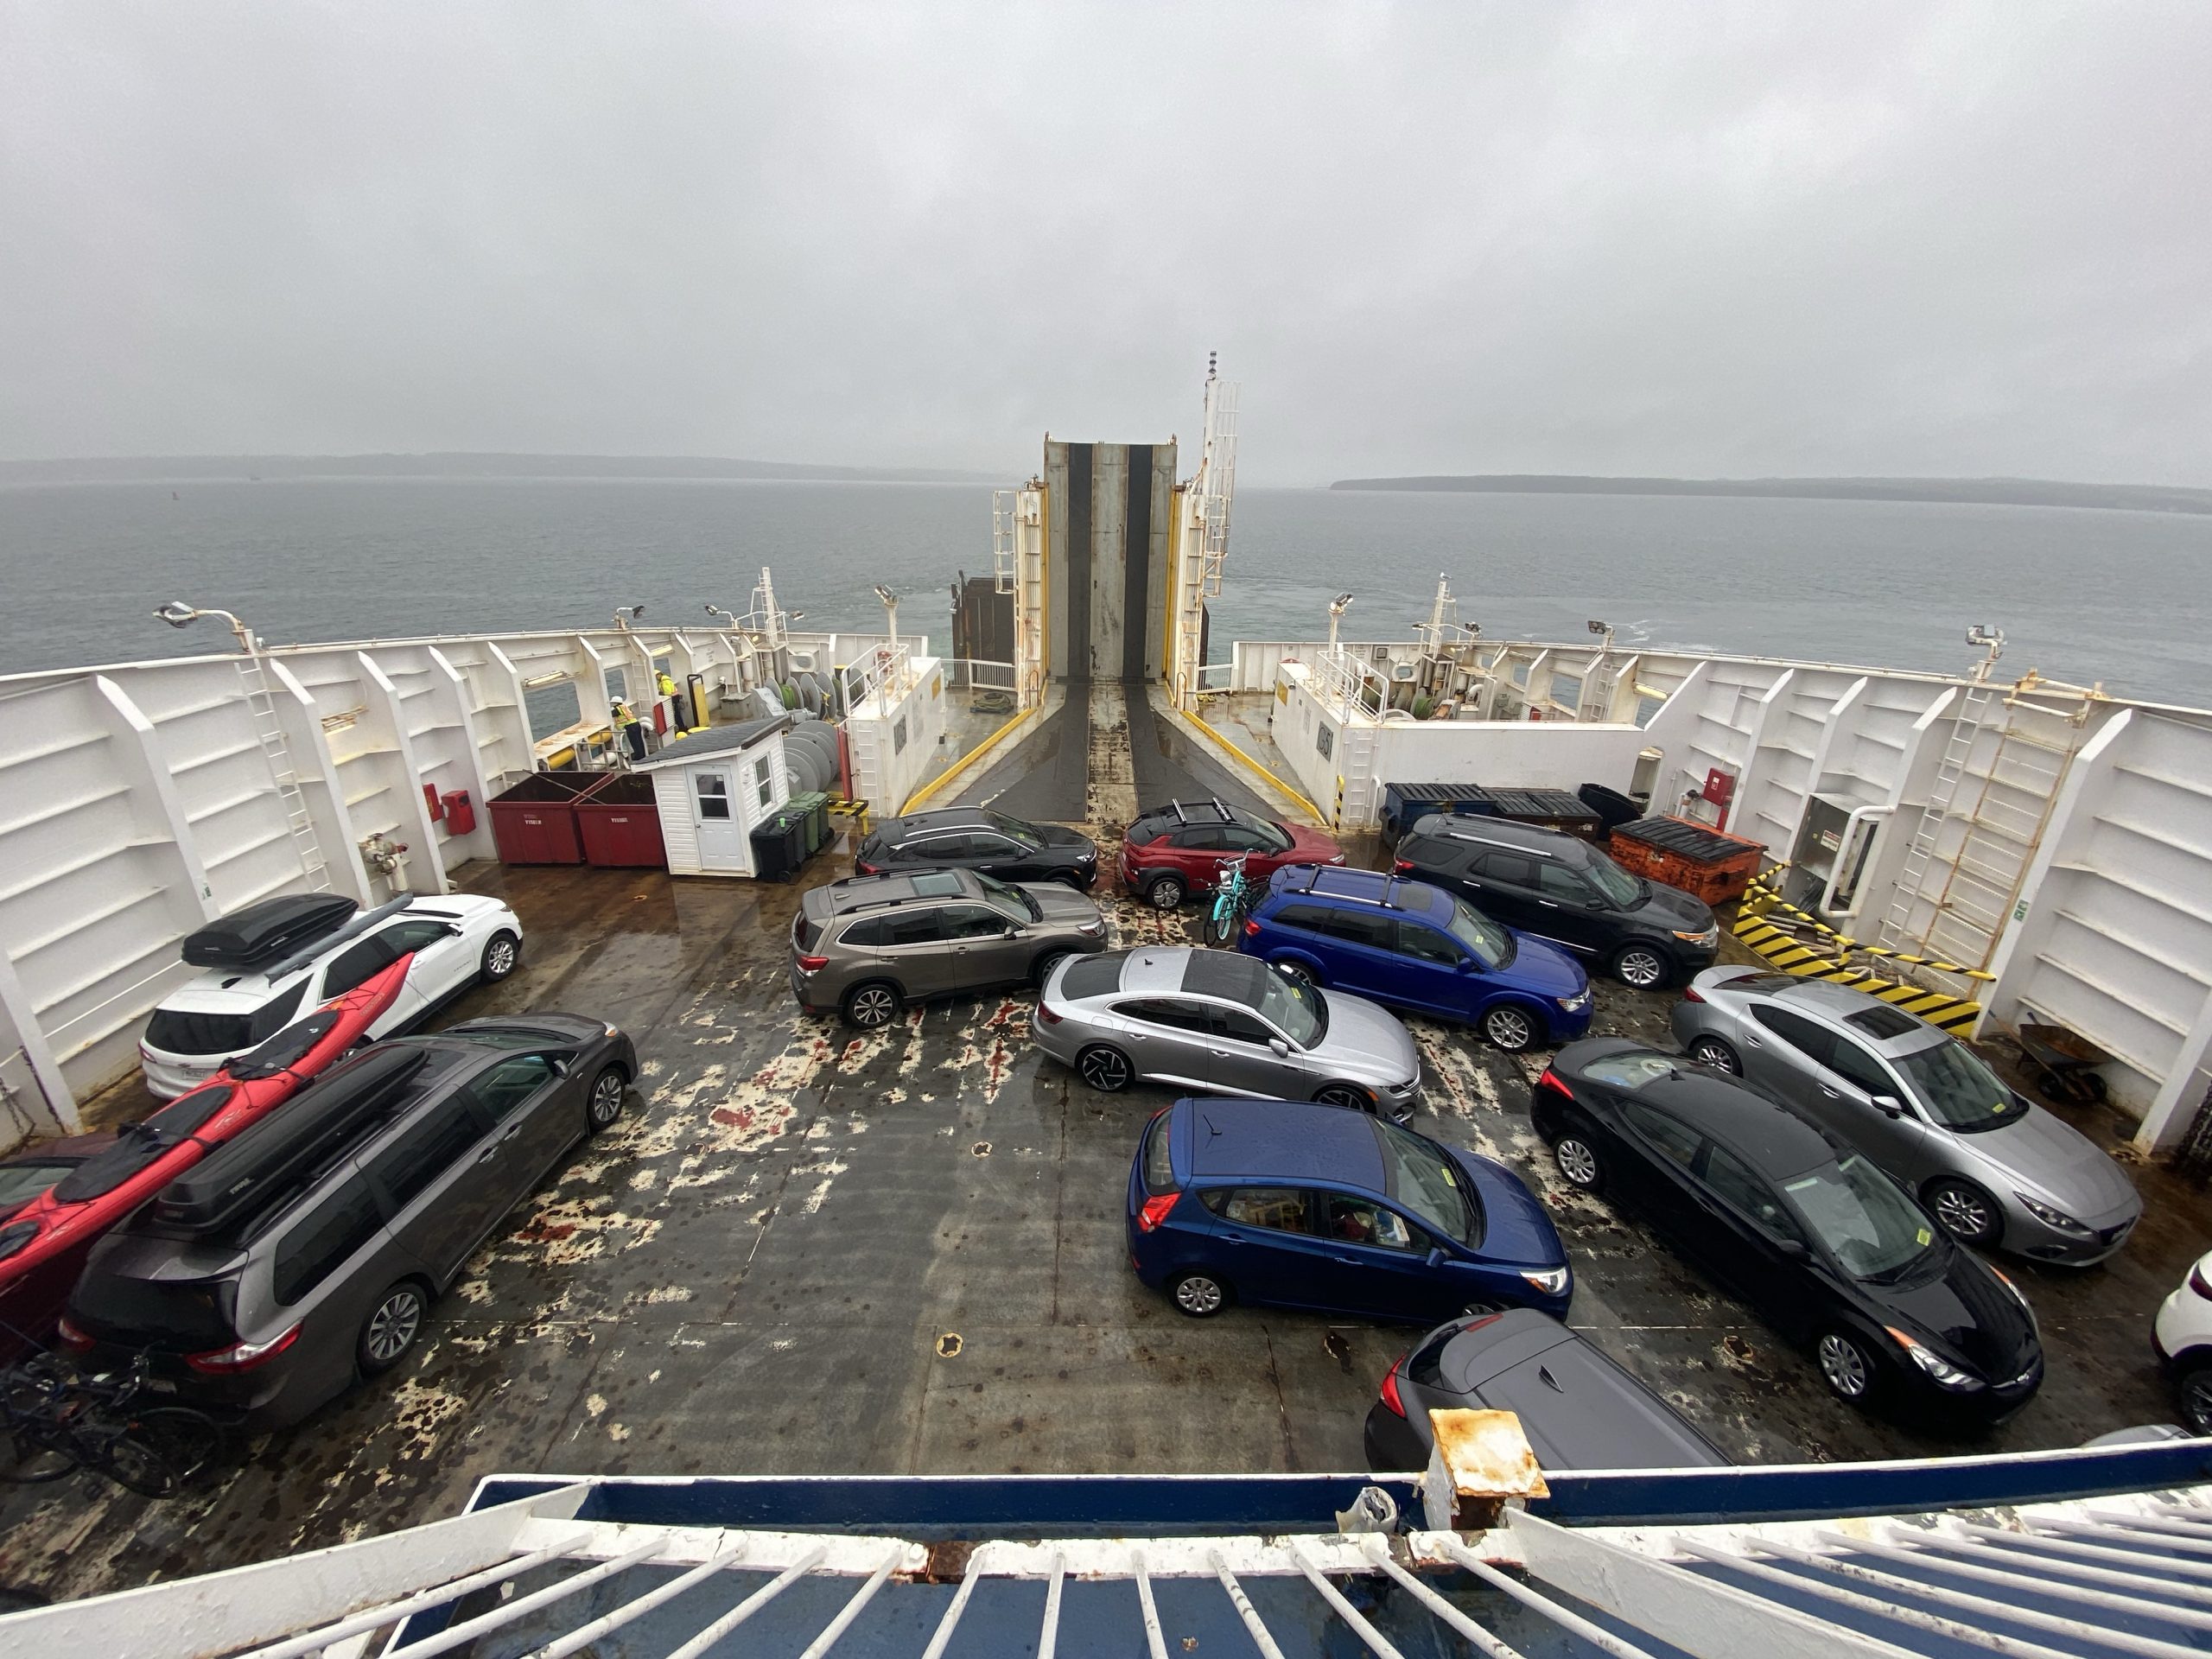 The upper-deck parking in steerage on our ferry to Newfoundland, probably for employees.